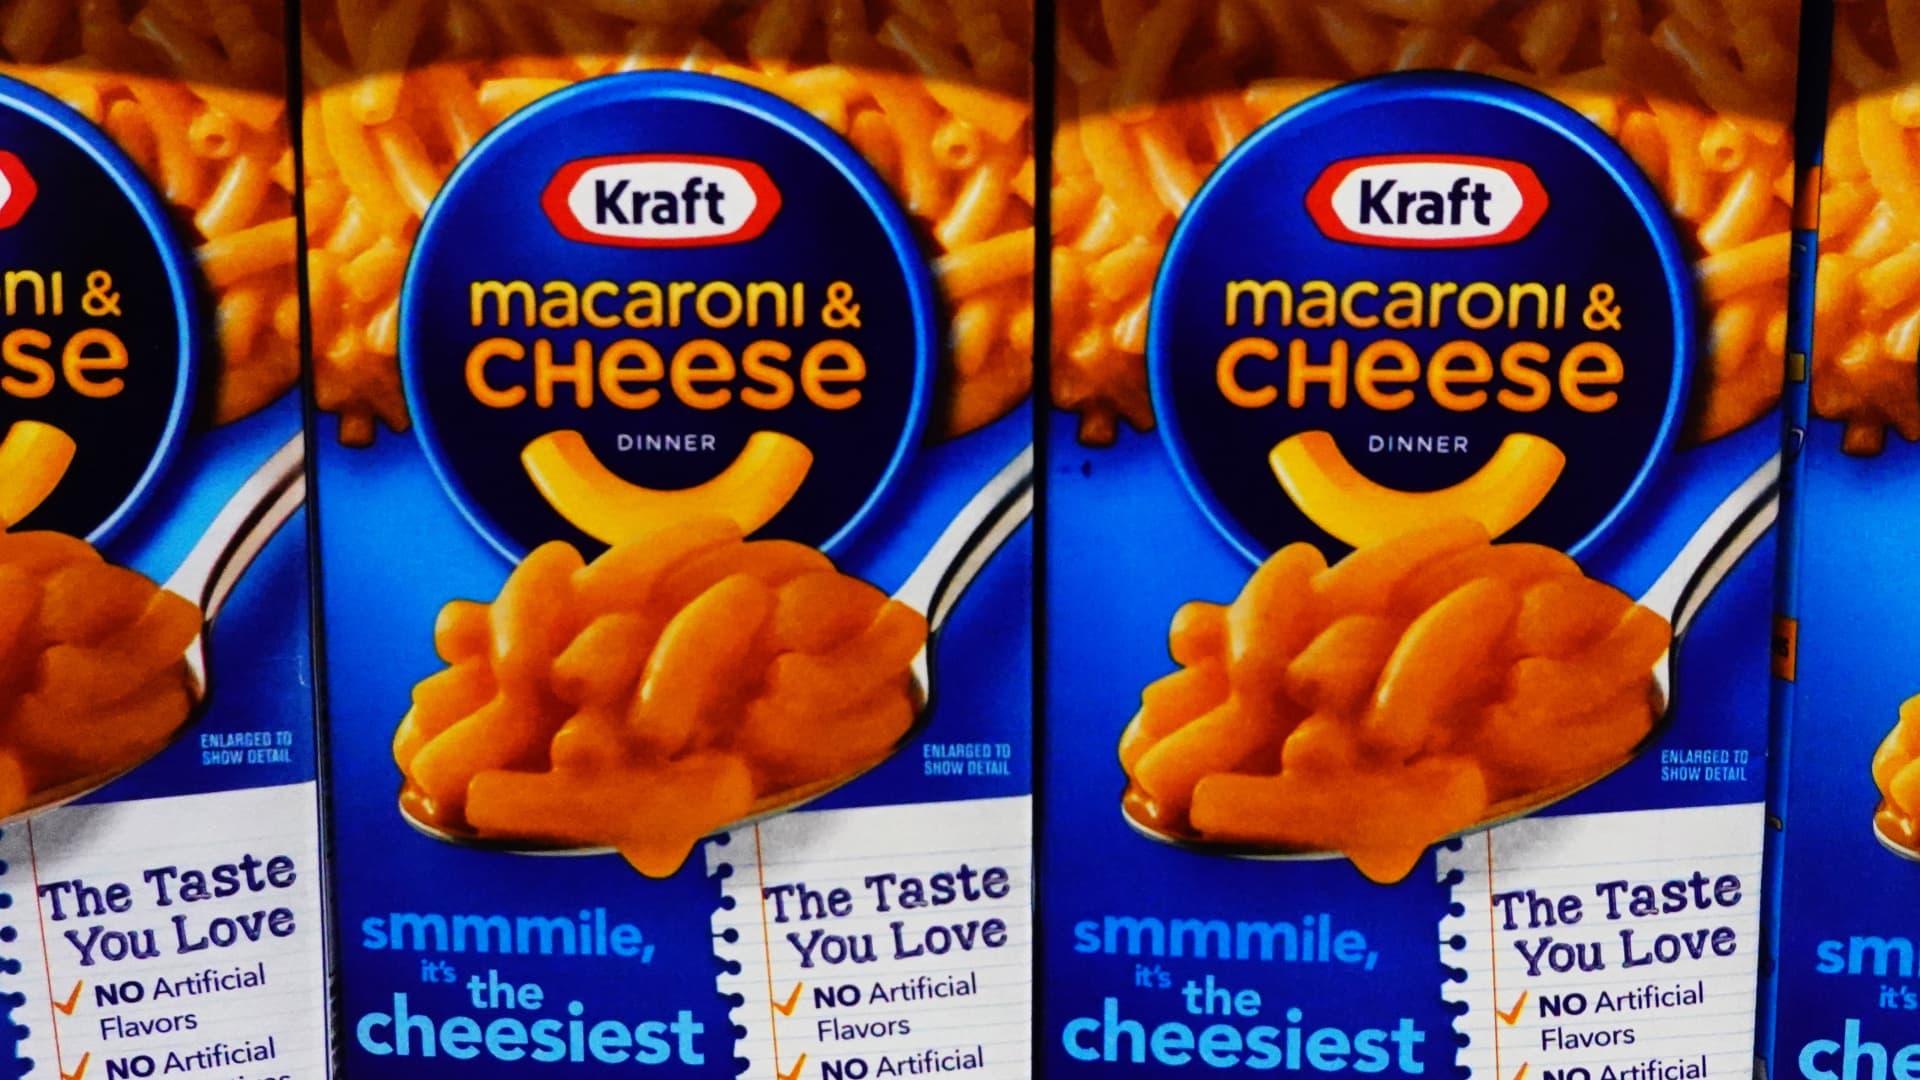 UBS downgrades Kraft Heinz as it faces rising inflation, competition from private labels